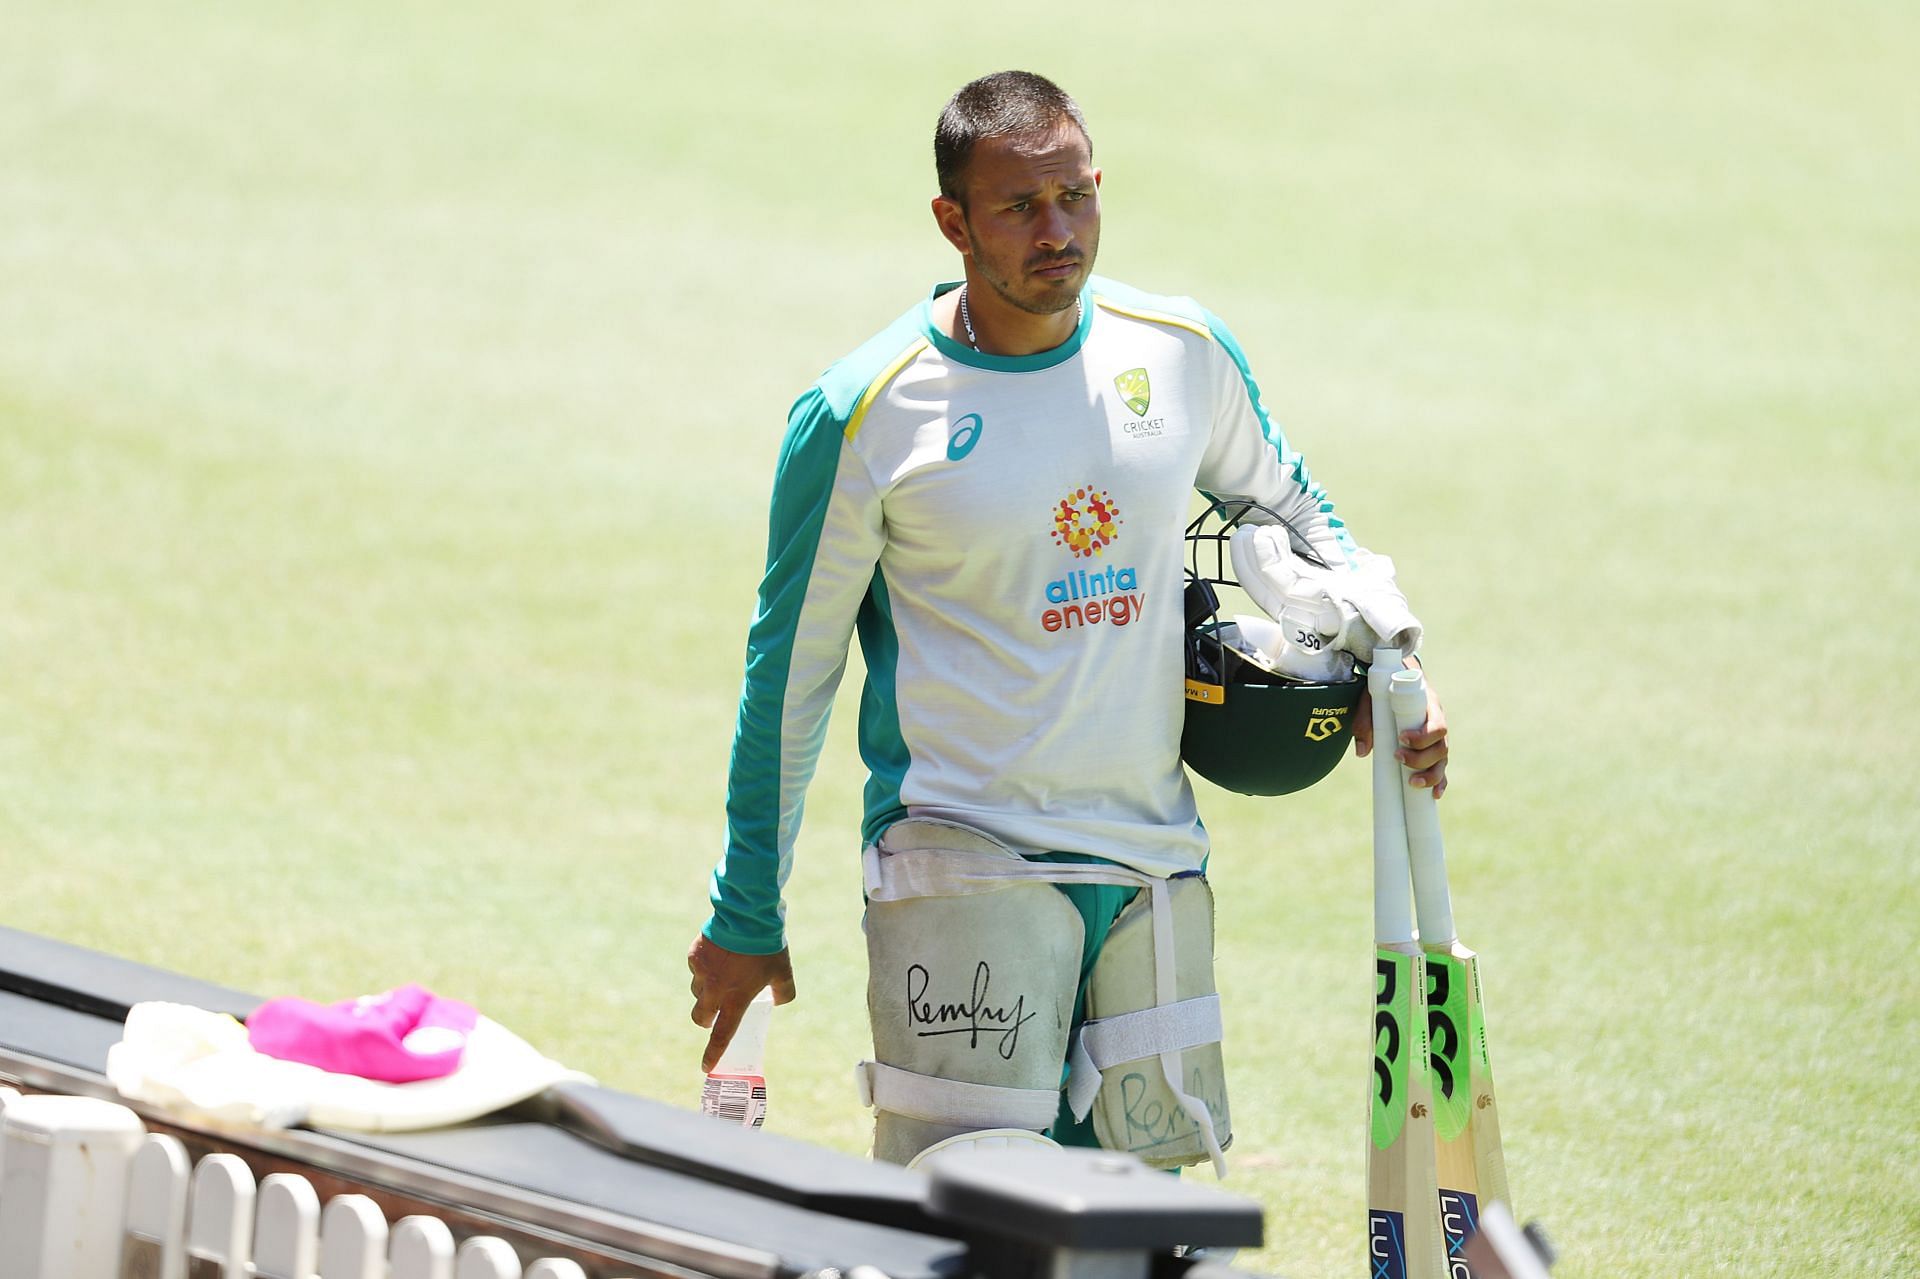 Usman Khawaja is set to play his first Test in over two years, having been named in the Australian XI for the fourth Ashes Test.